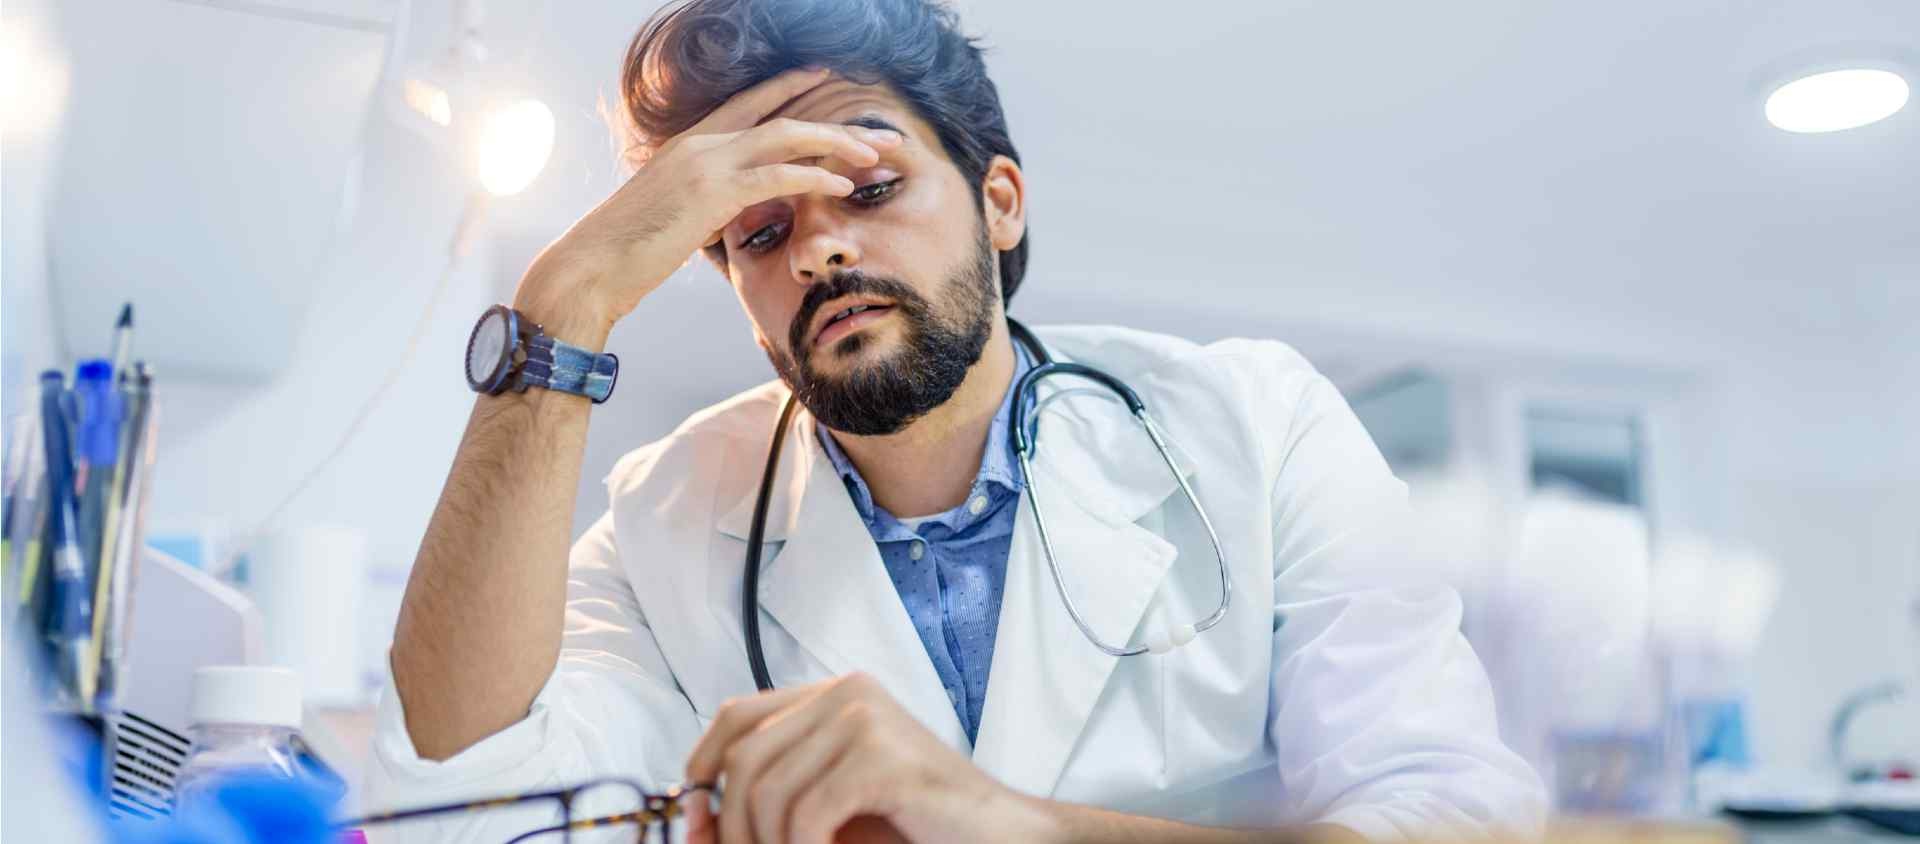 How to Use Technology to Ease Physician Burnout